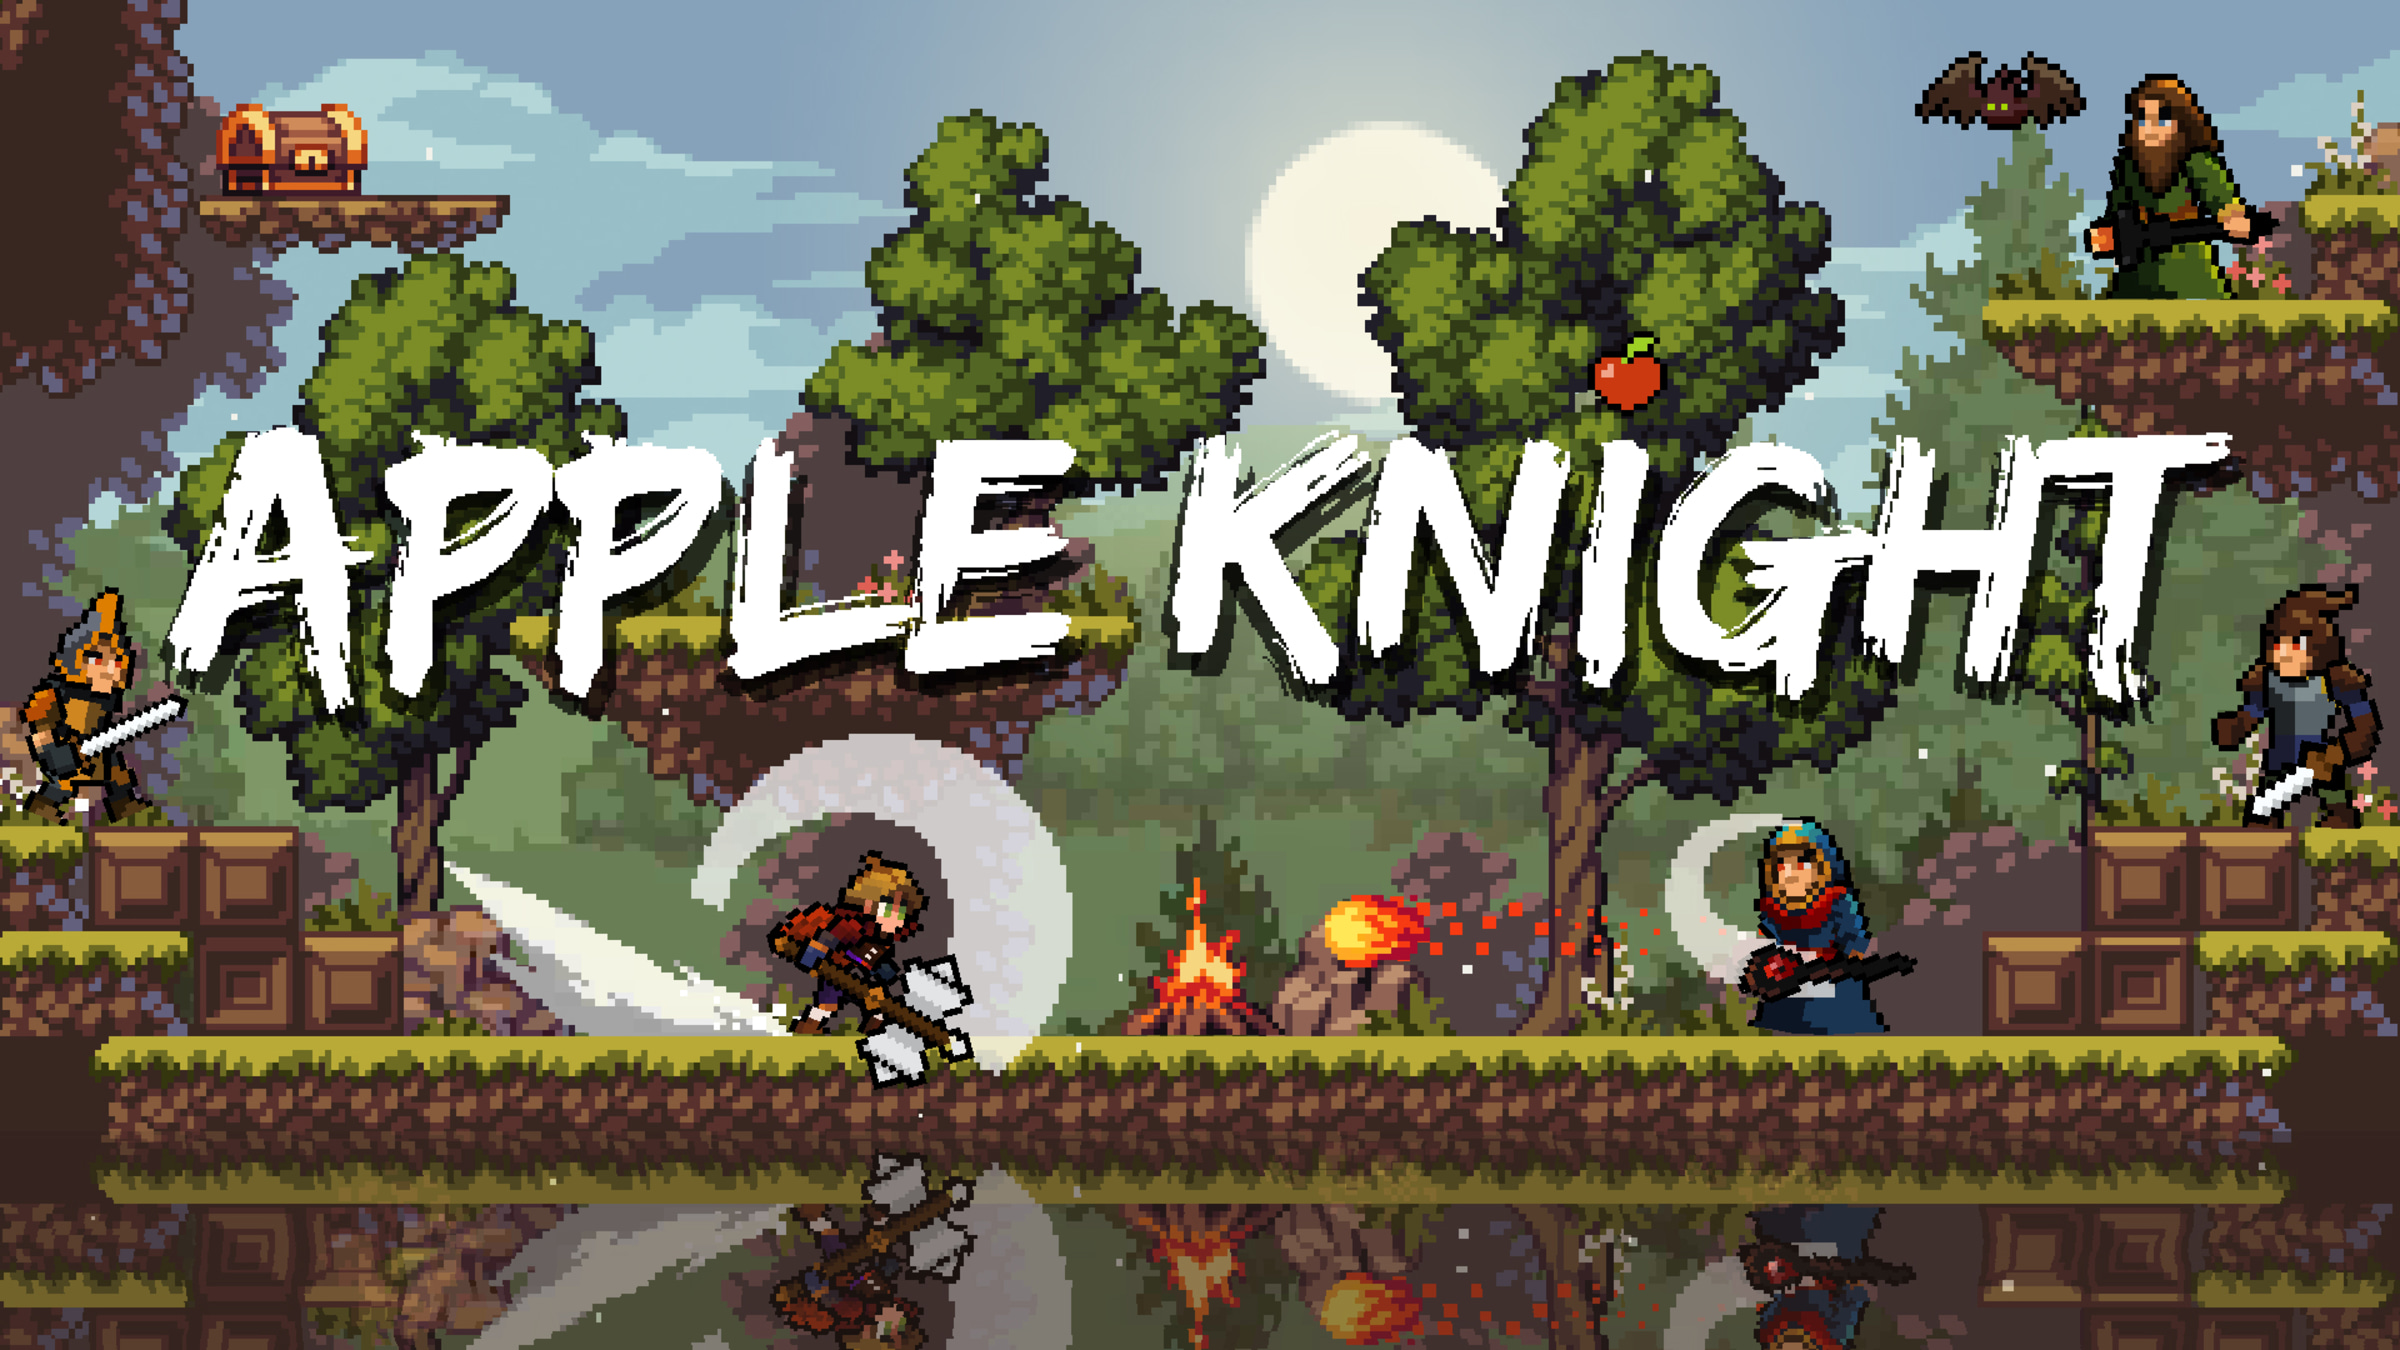 Apple Knight 2 by Limitless LLC